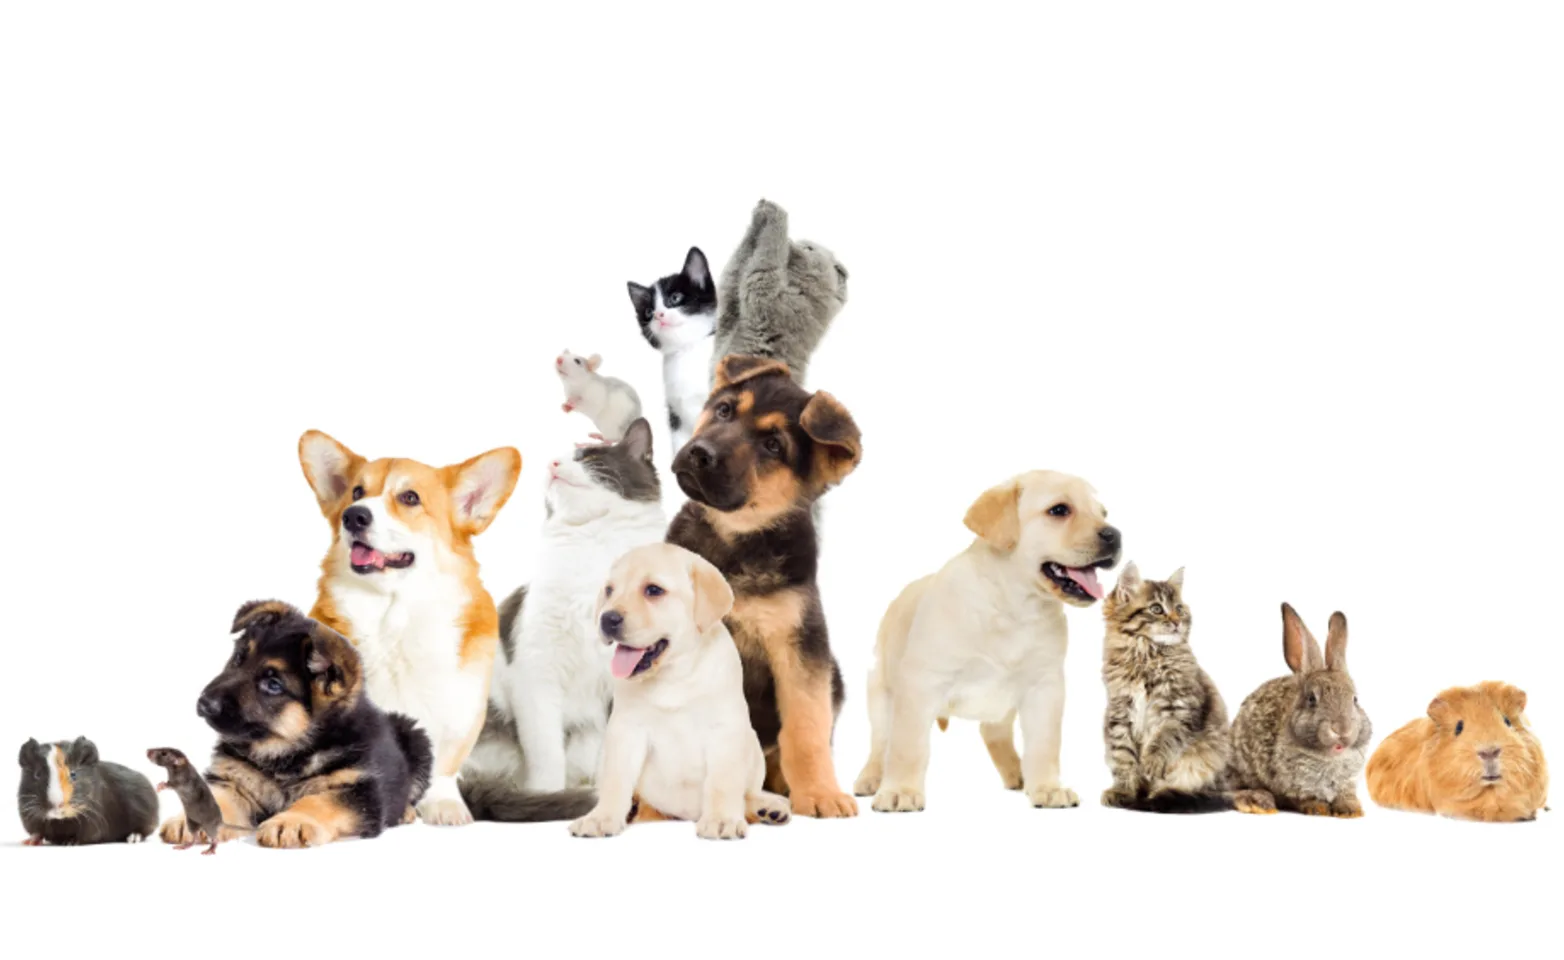 Dogs and cats with pocket pets with a white background